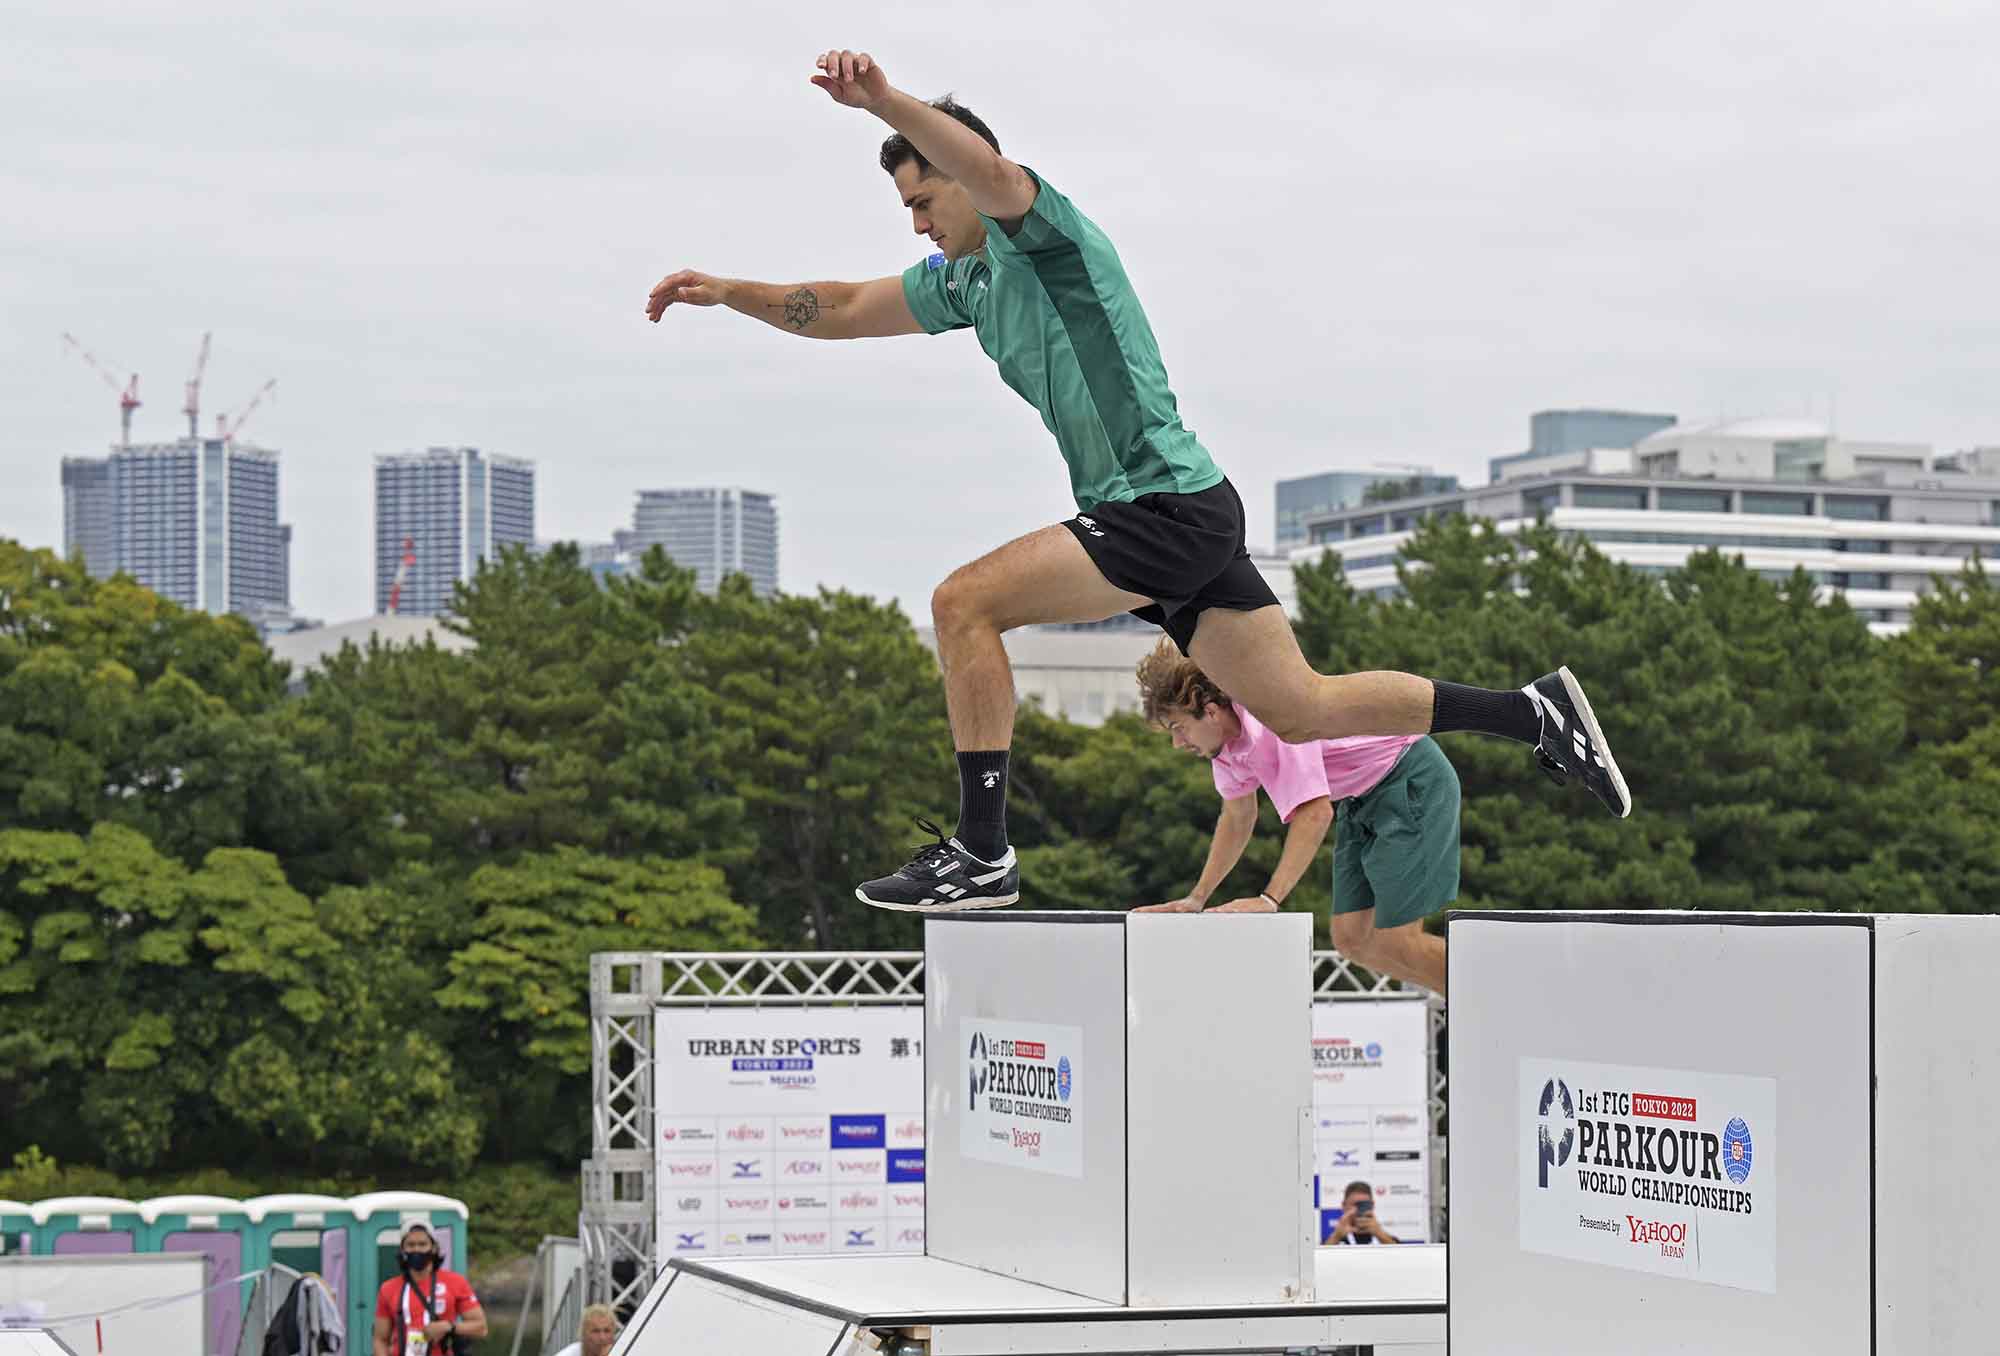 Two men in street clothes leap in tandem along two lanes of a parkour competition obstacle course during a speed trial.